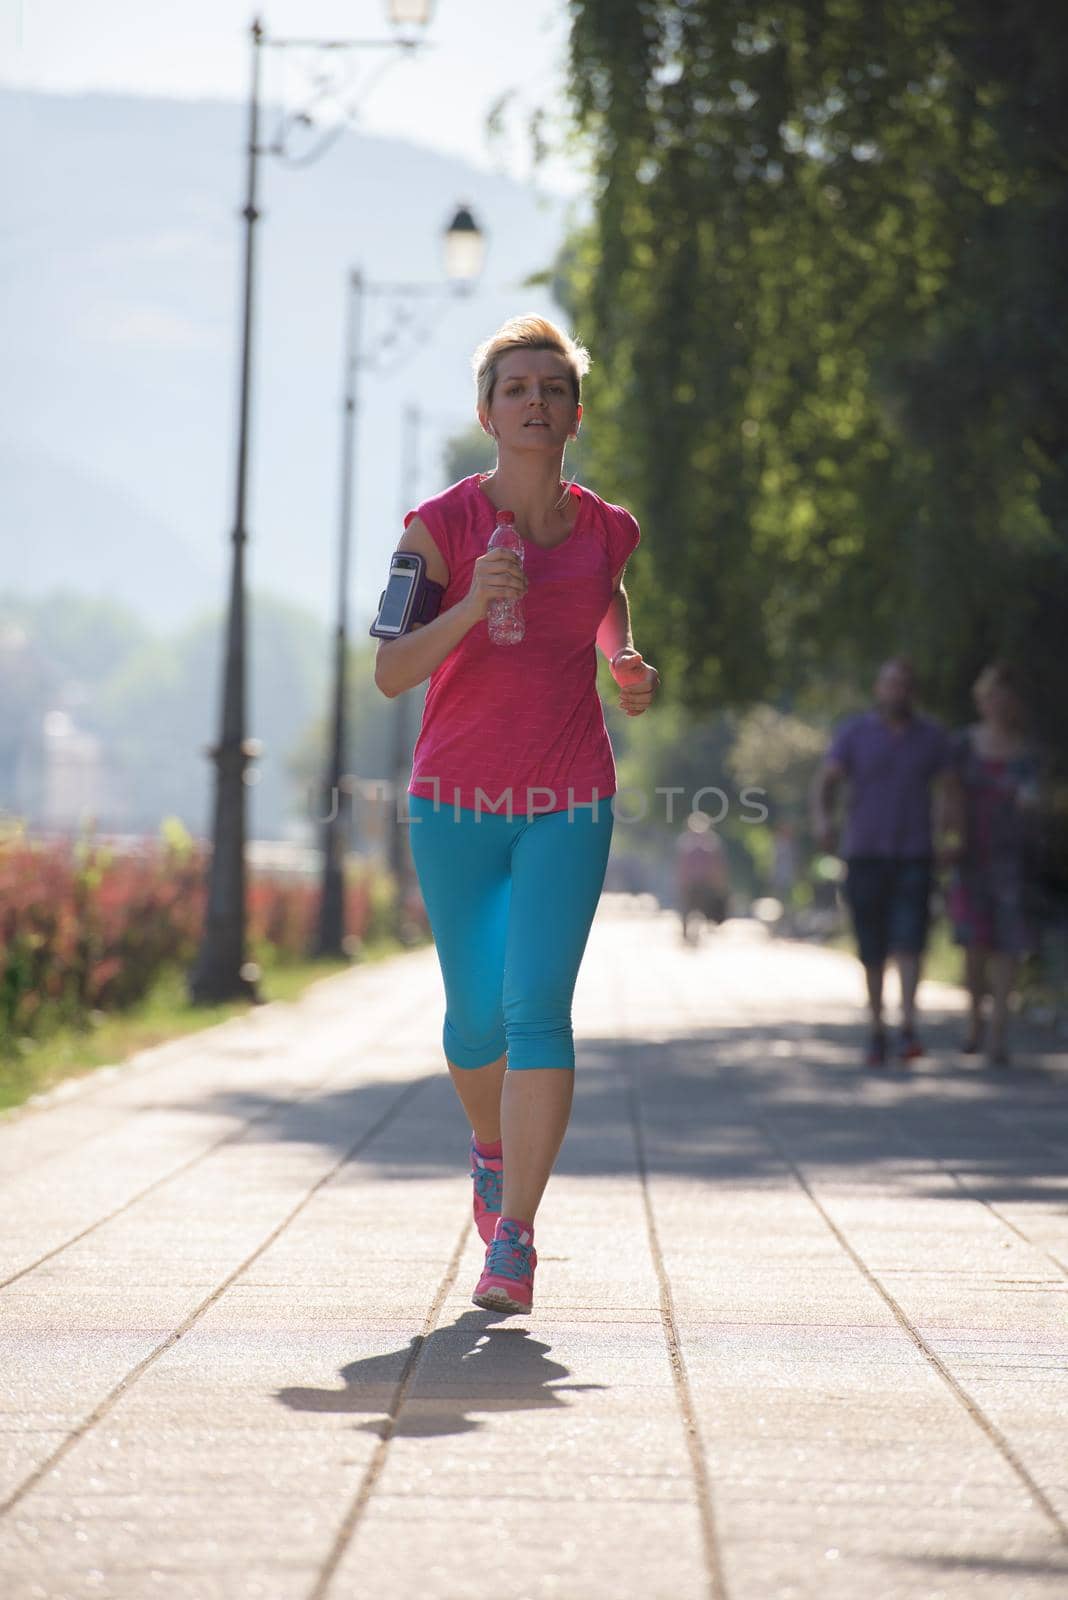 sporty woman running on sidewalk at early morning with city  sunrise scene in background